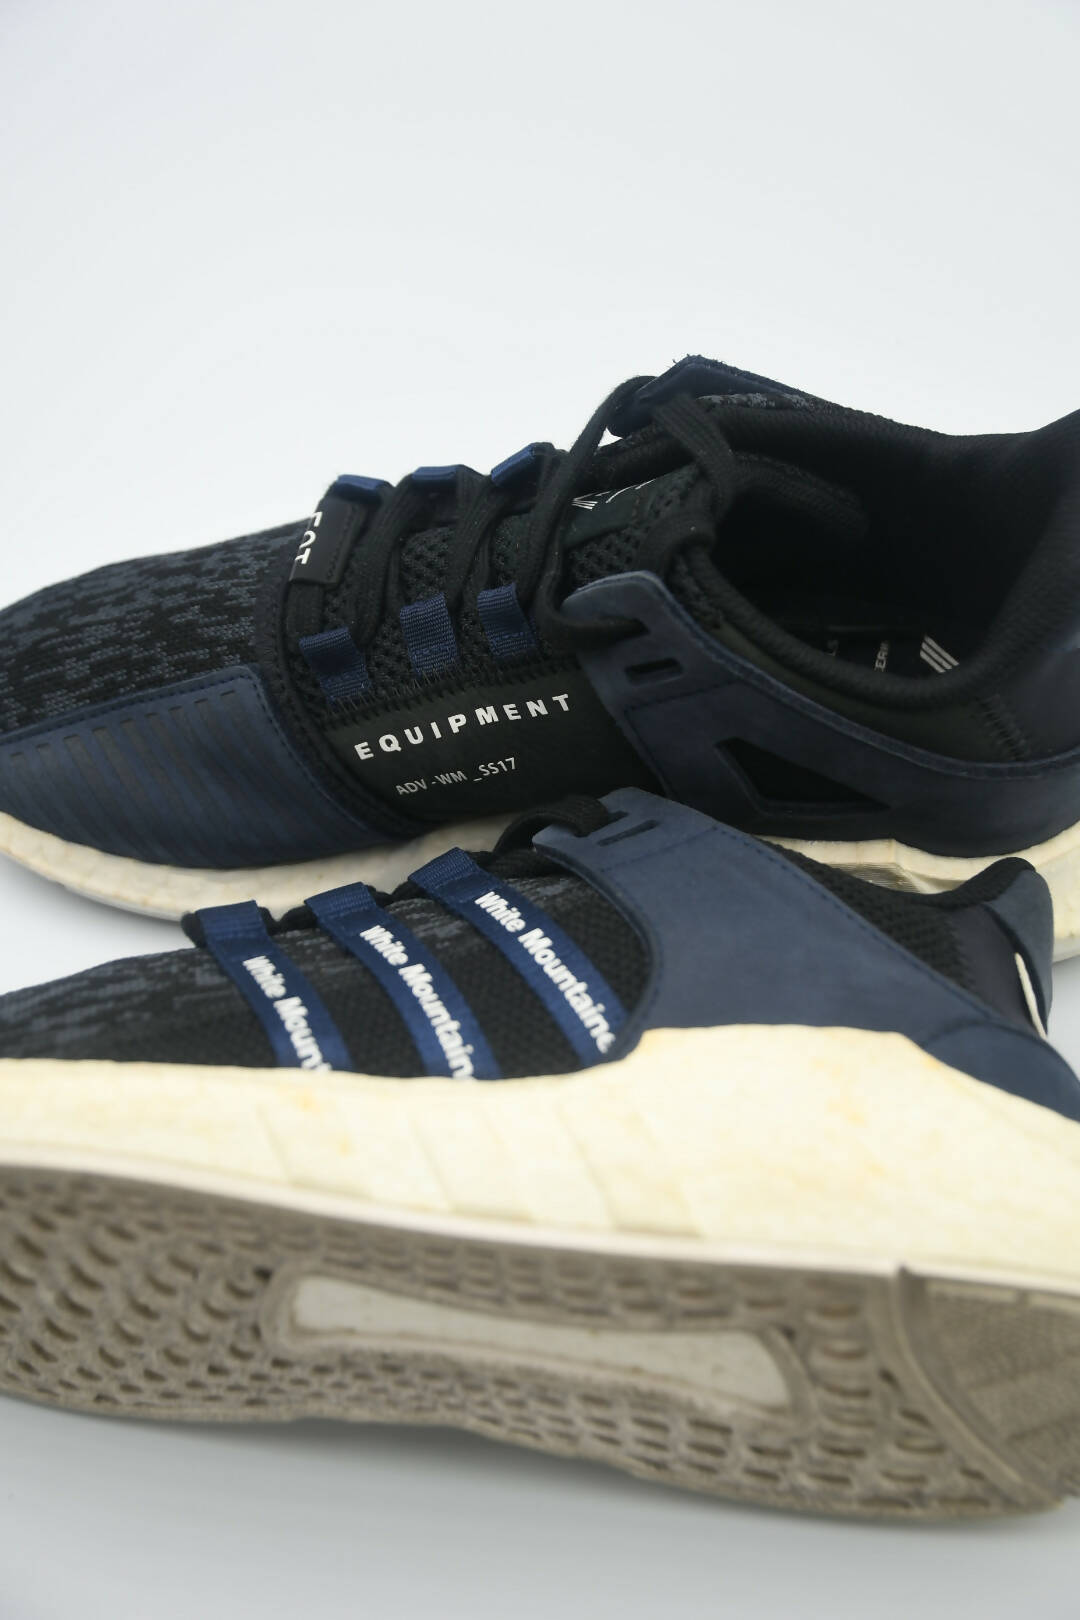 Image of Adidas X White Mountaineering Eqt Support 93/17 Black